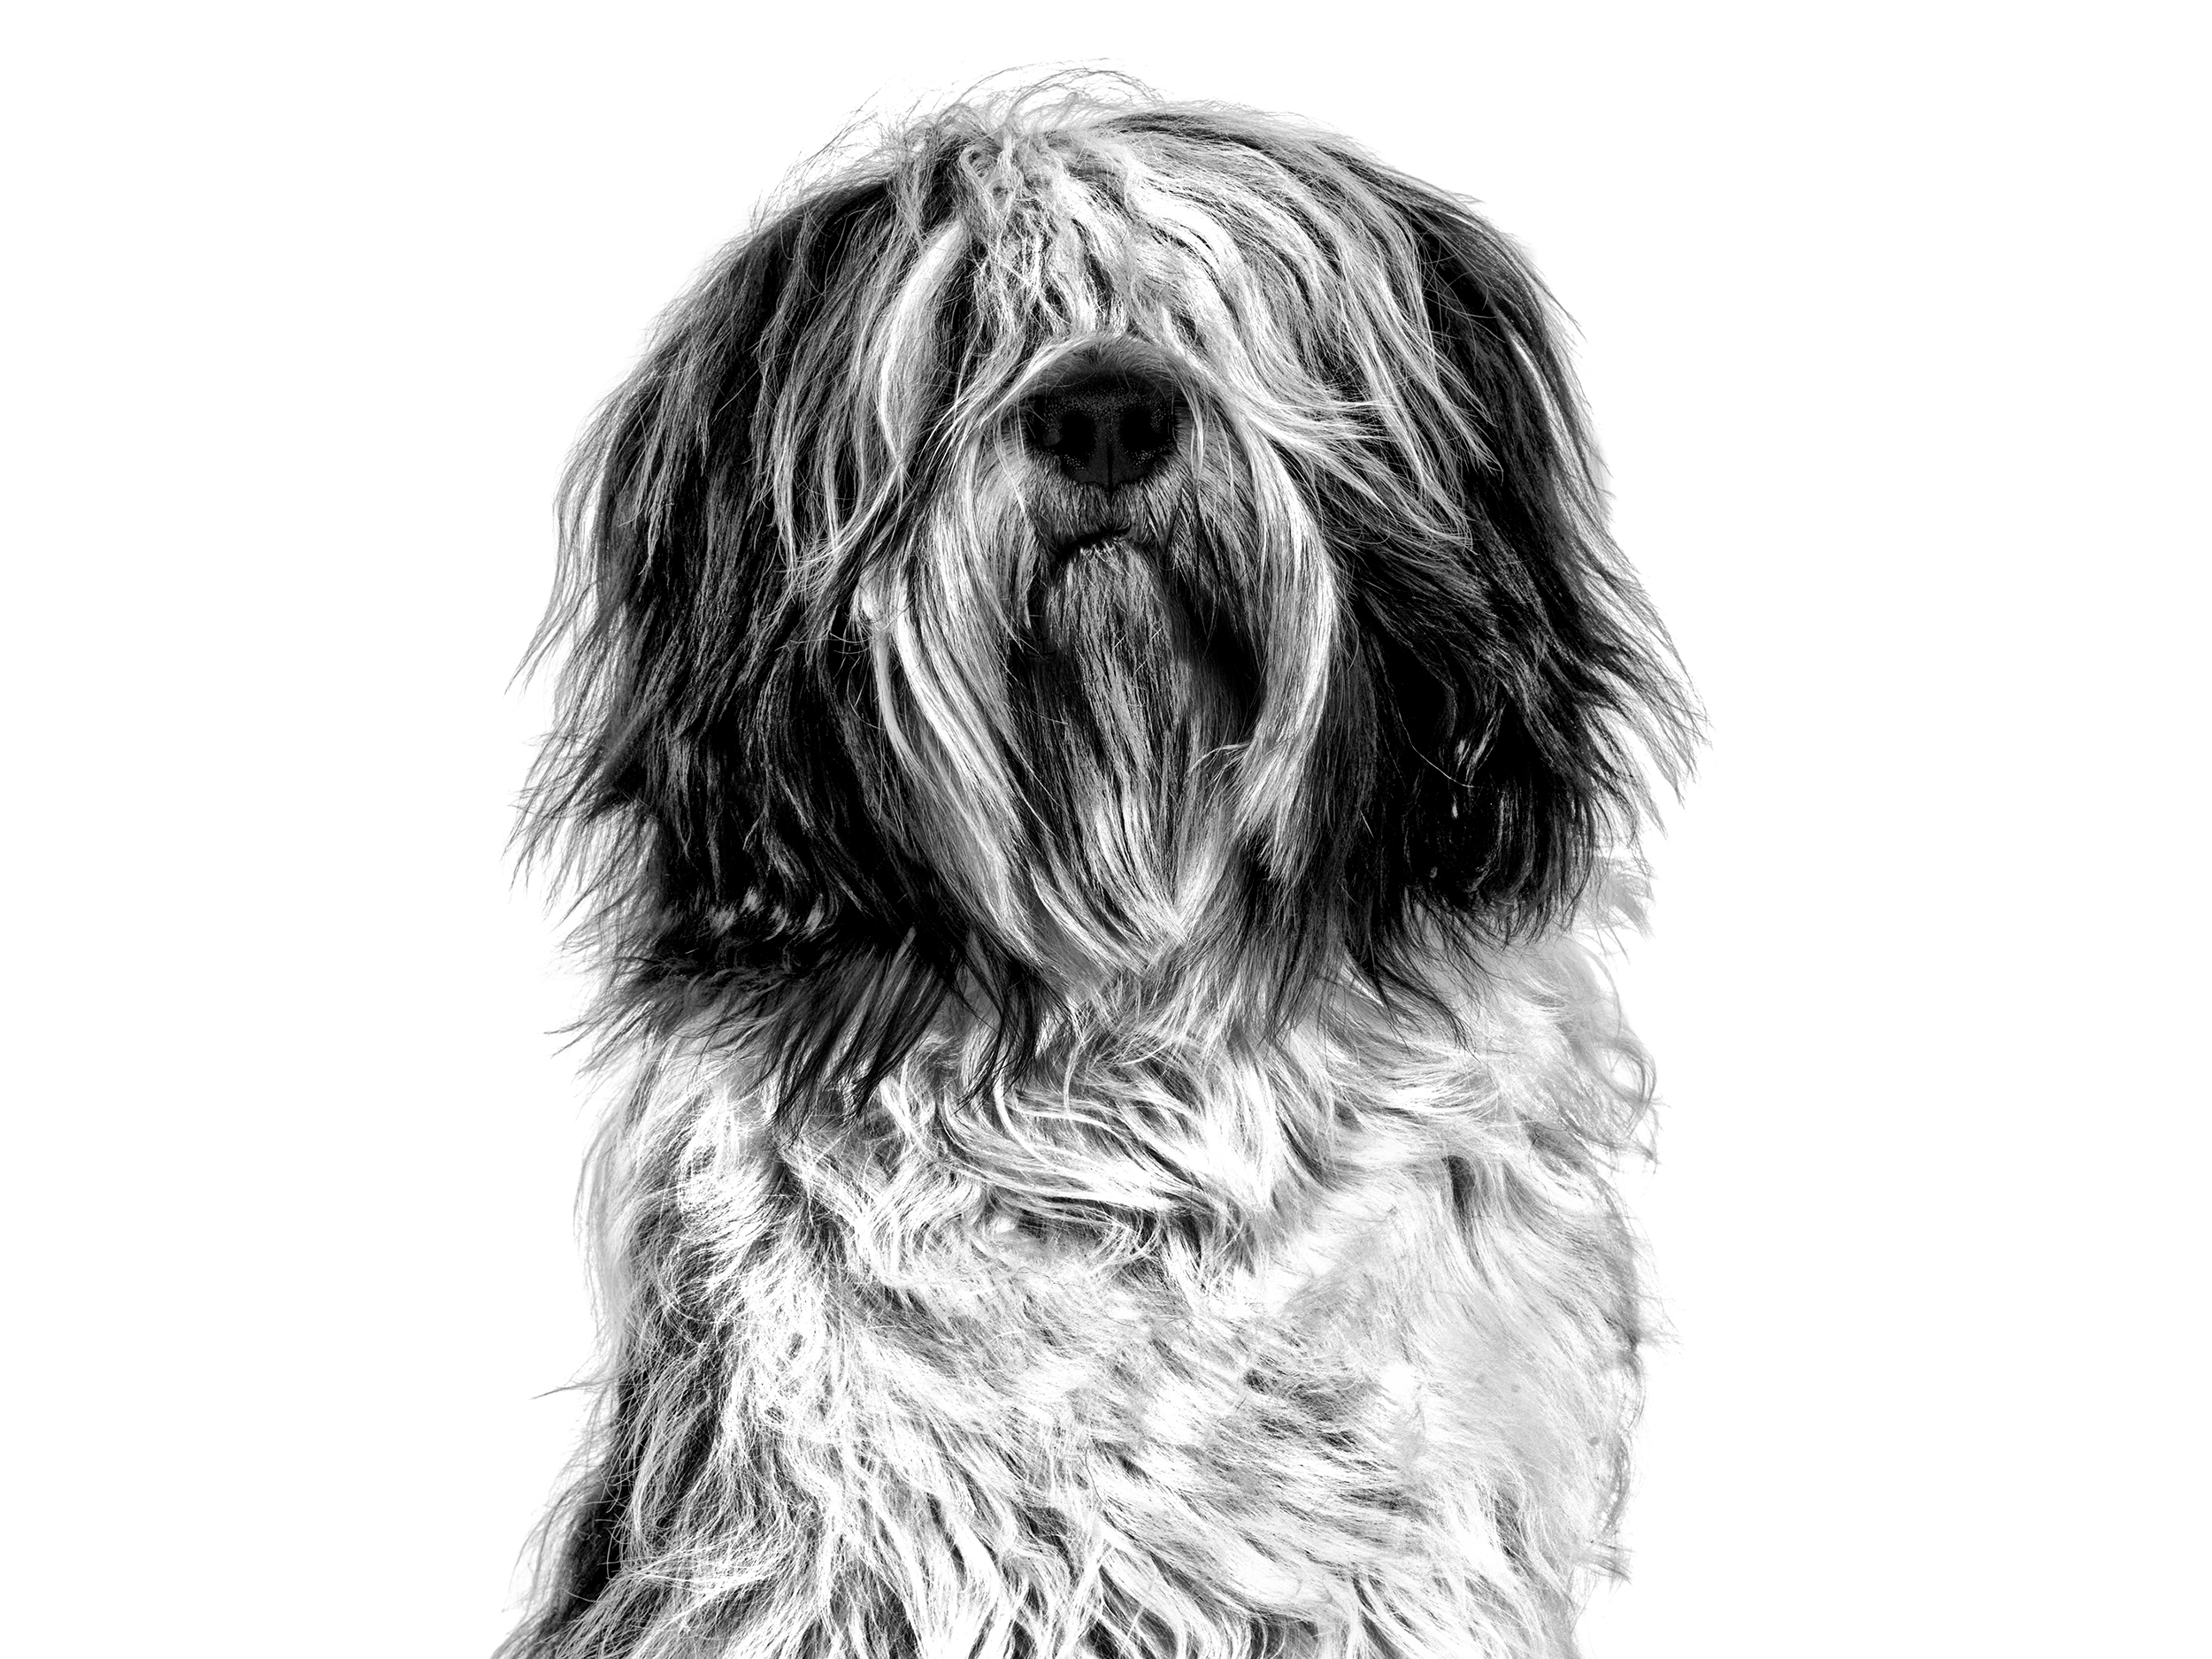 Polish Lowland Sheepdog adult in black and white